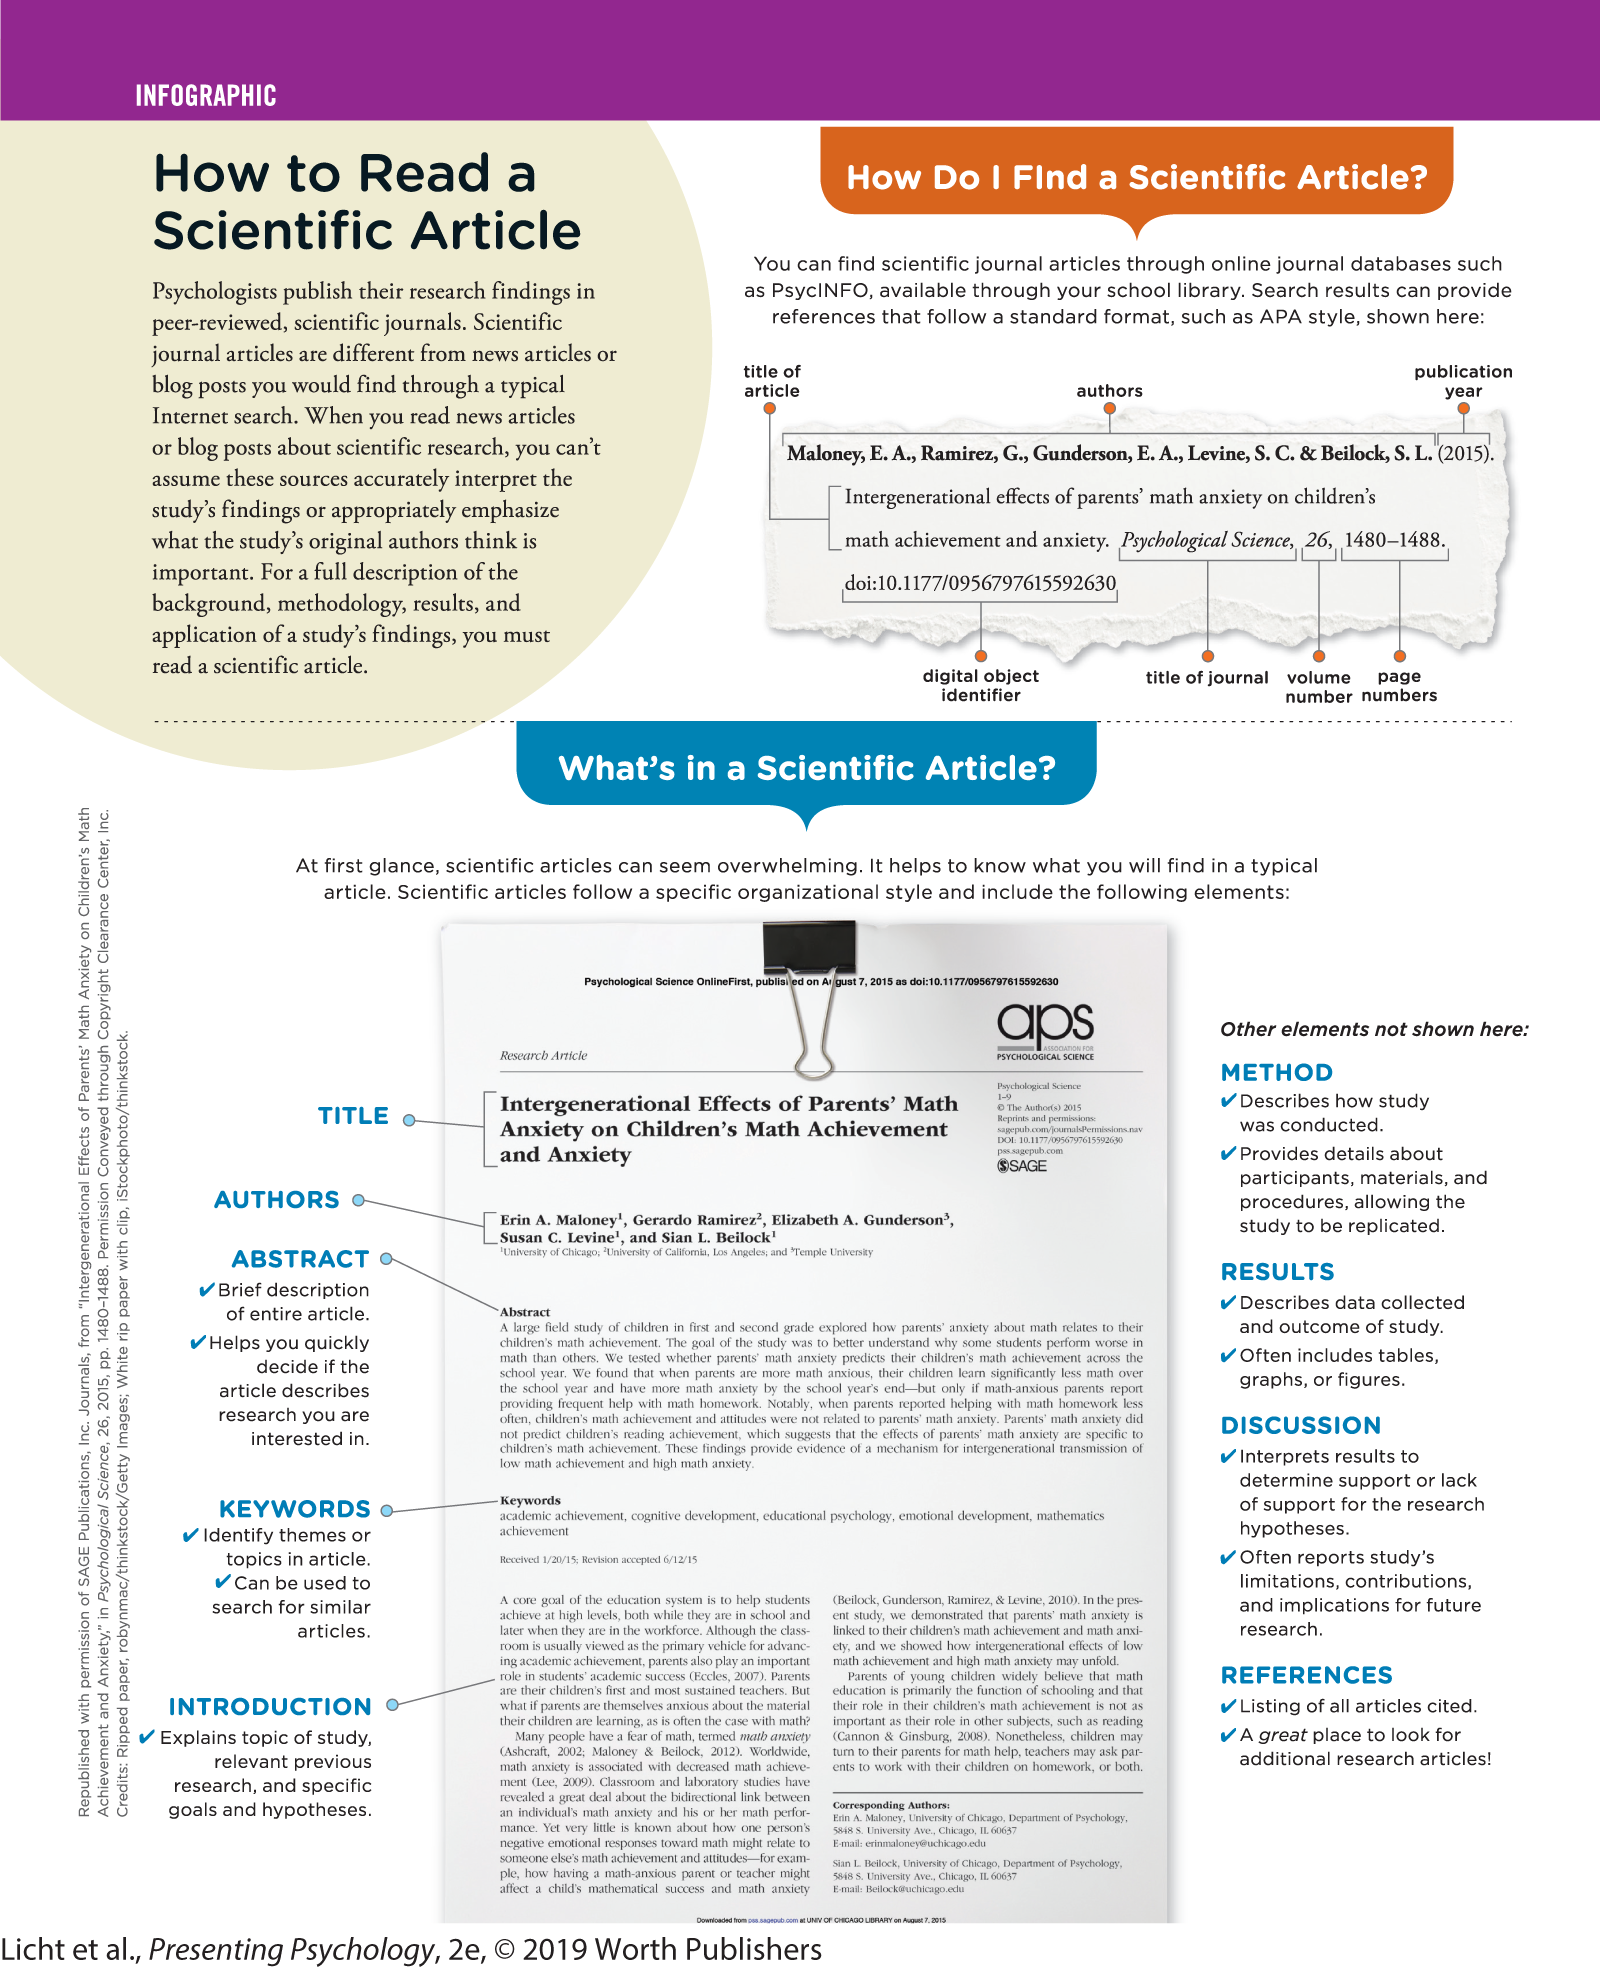 An infograph describes what's a scientific article and how to find and read it. You can read full description from the link below